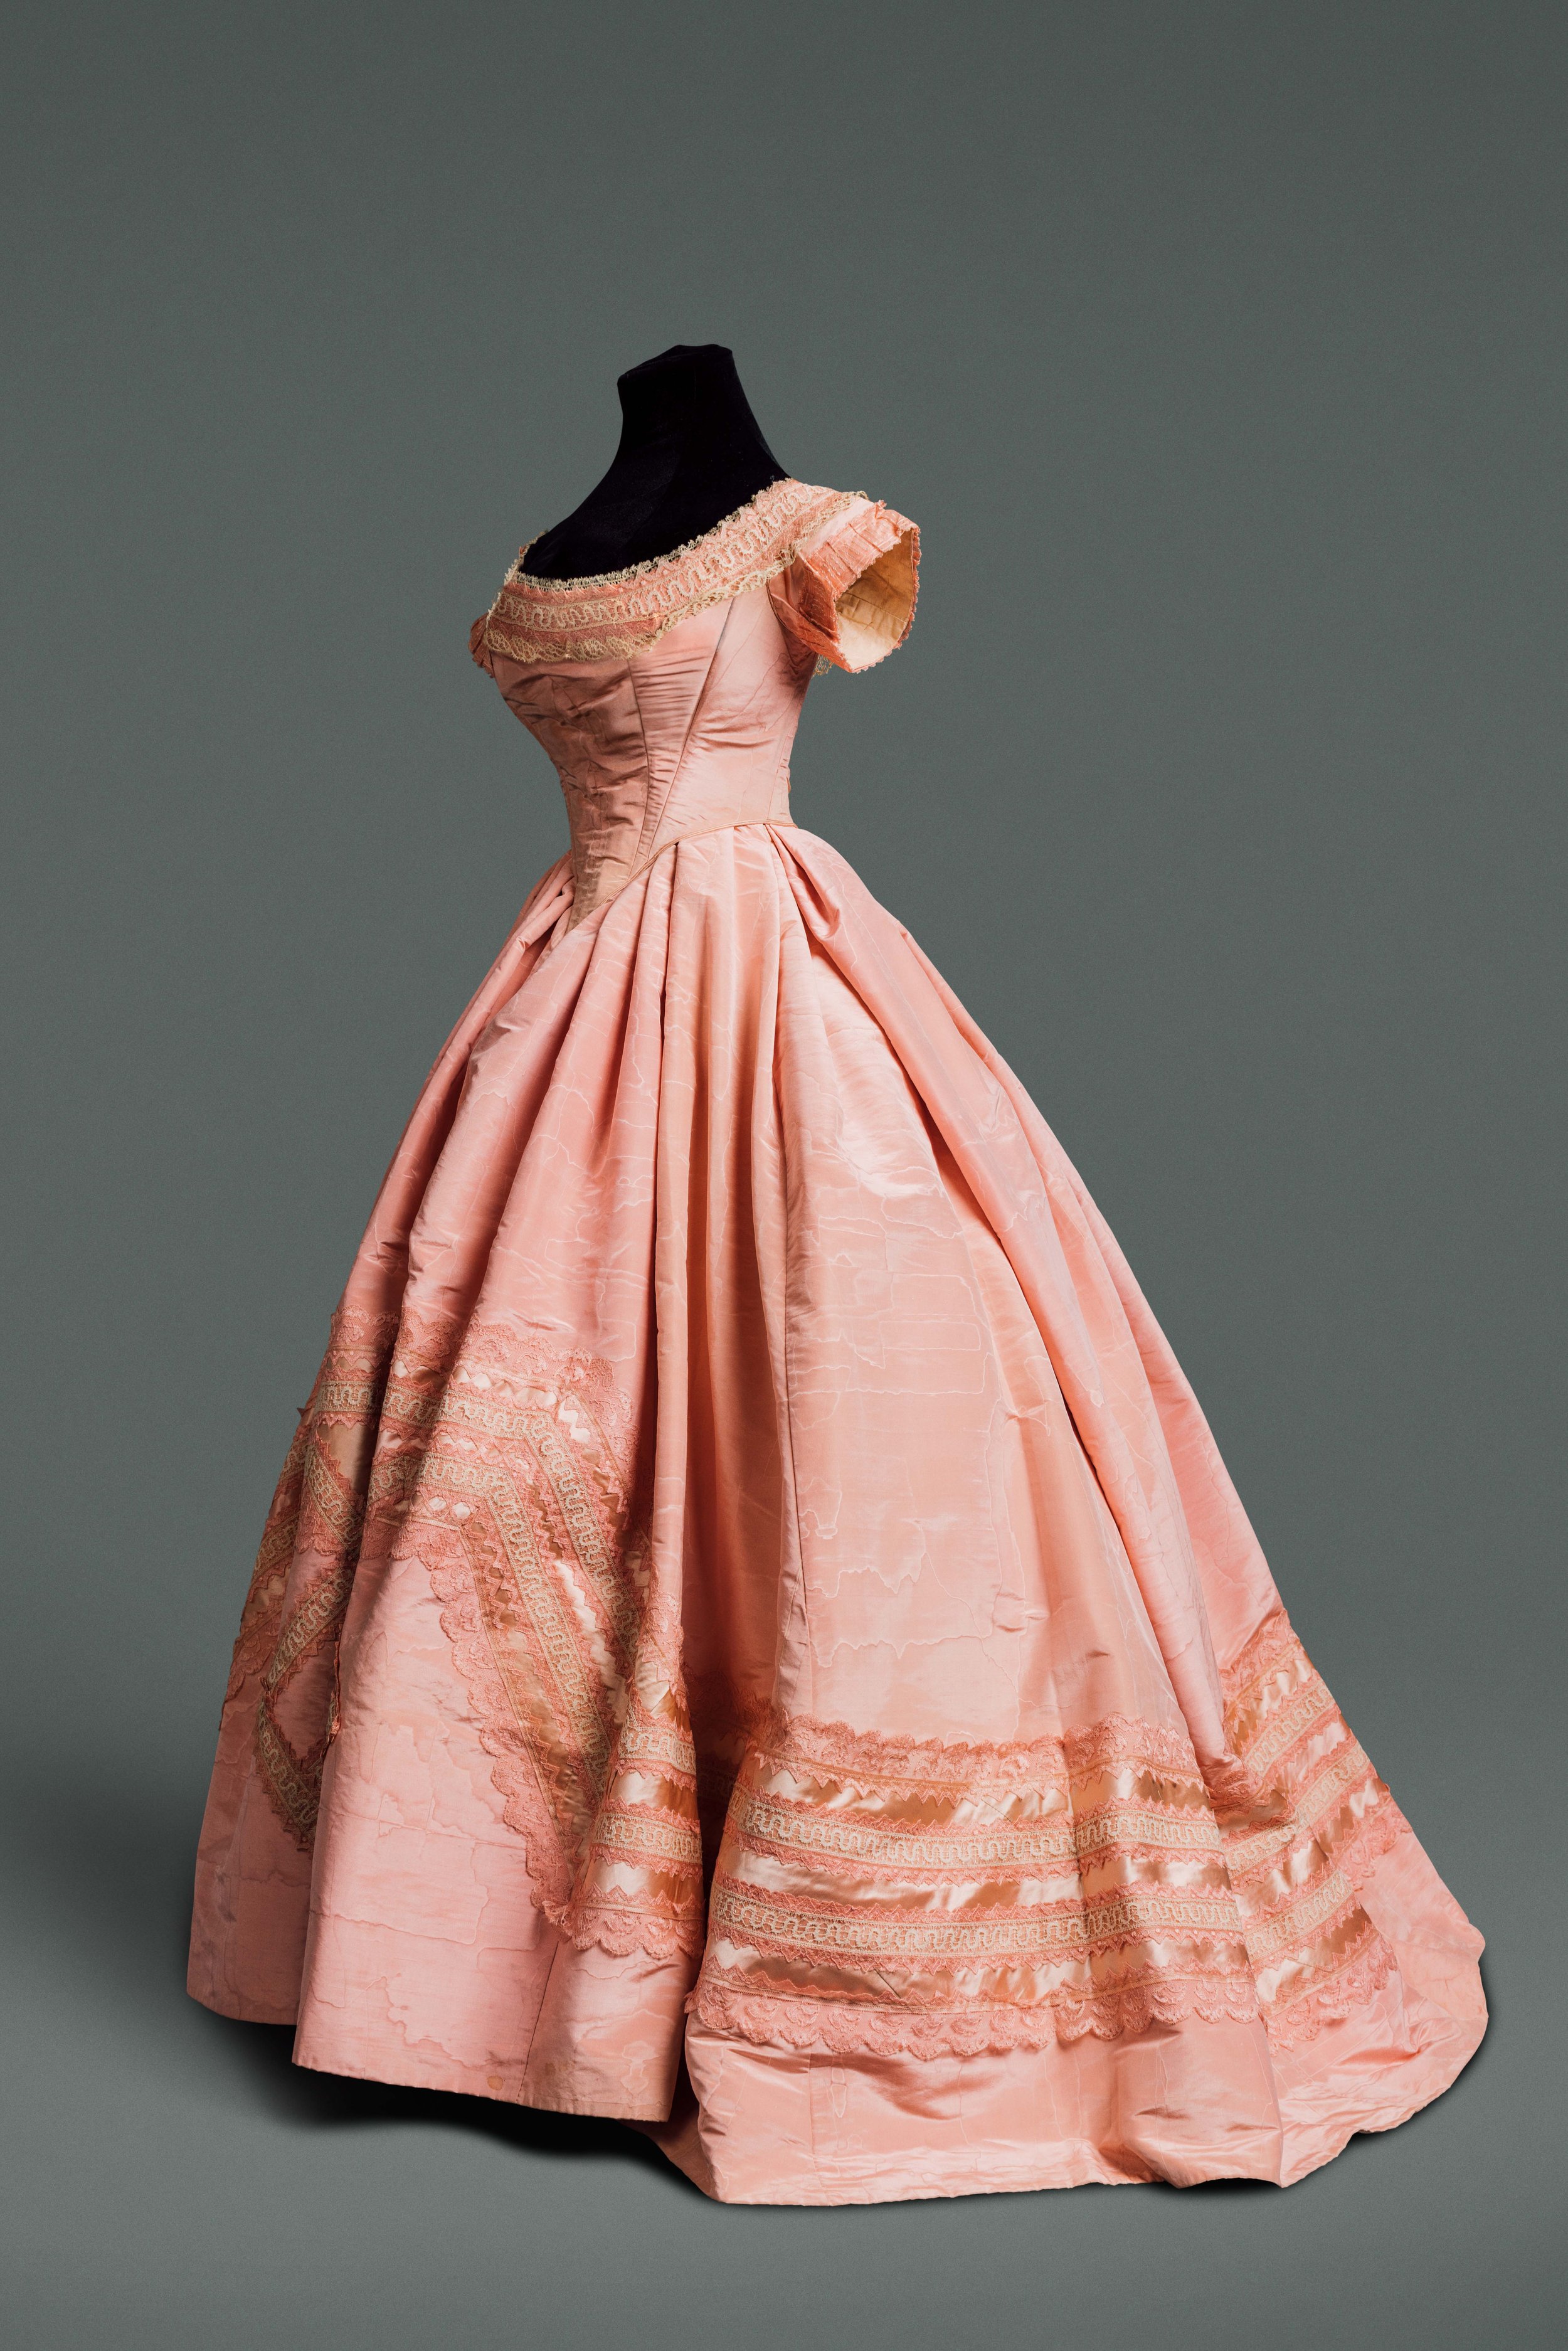 1830s Fashion - Ball Gown Collection at Mint Museum